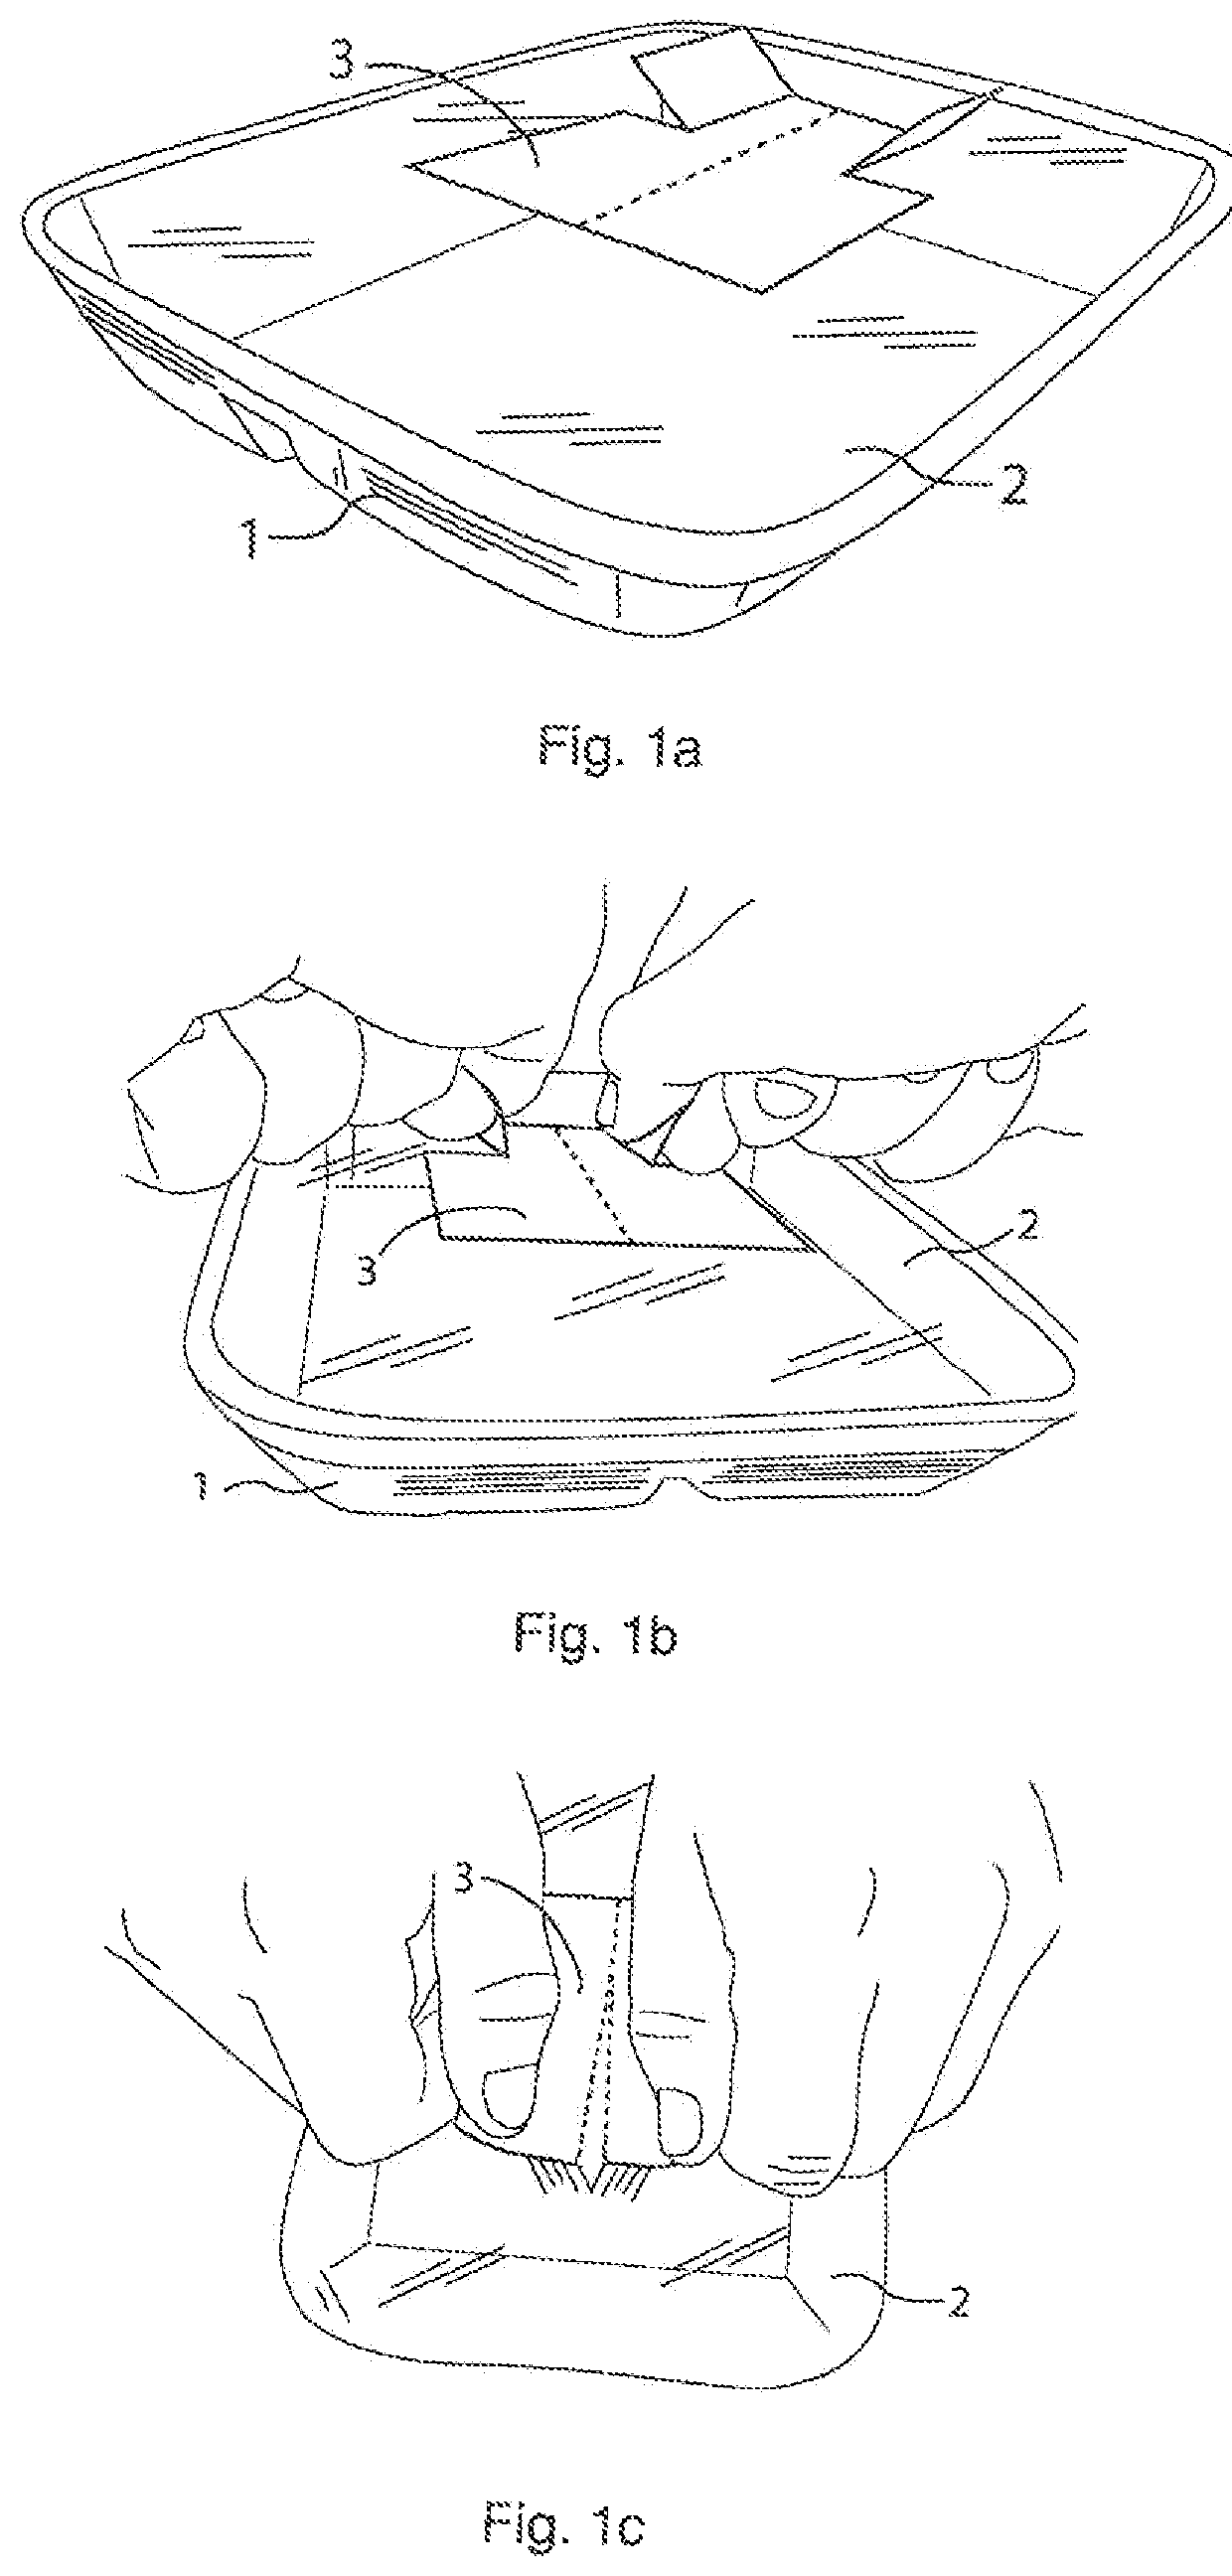 Wrapping tearing device